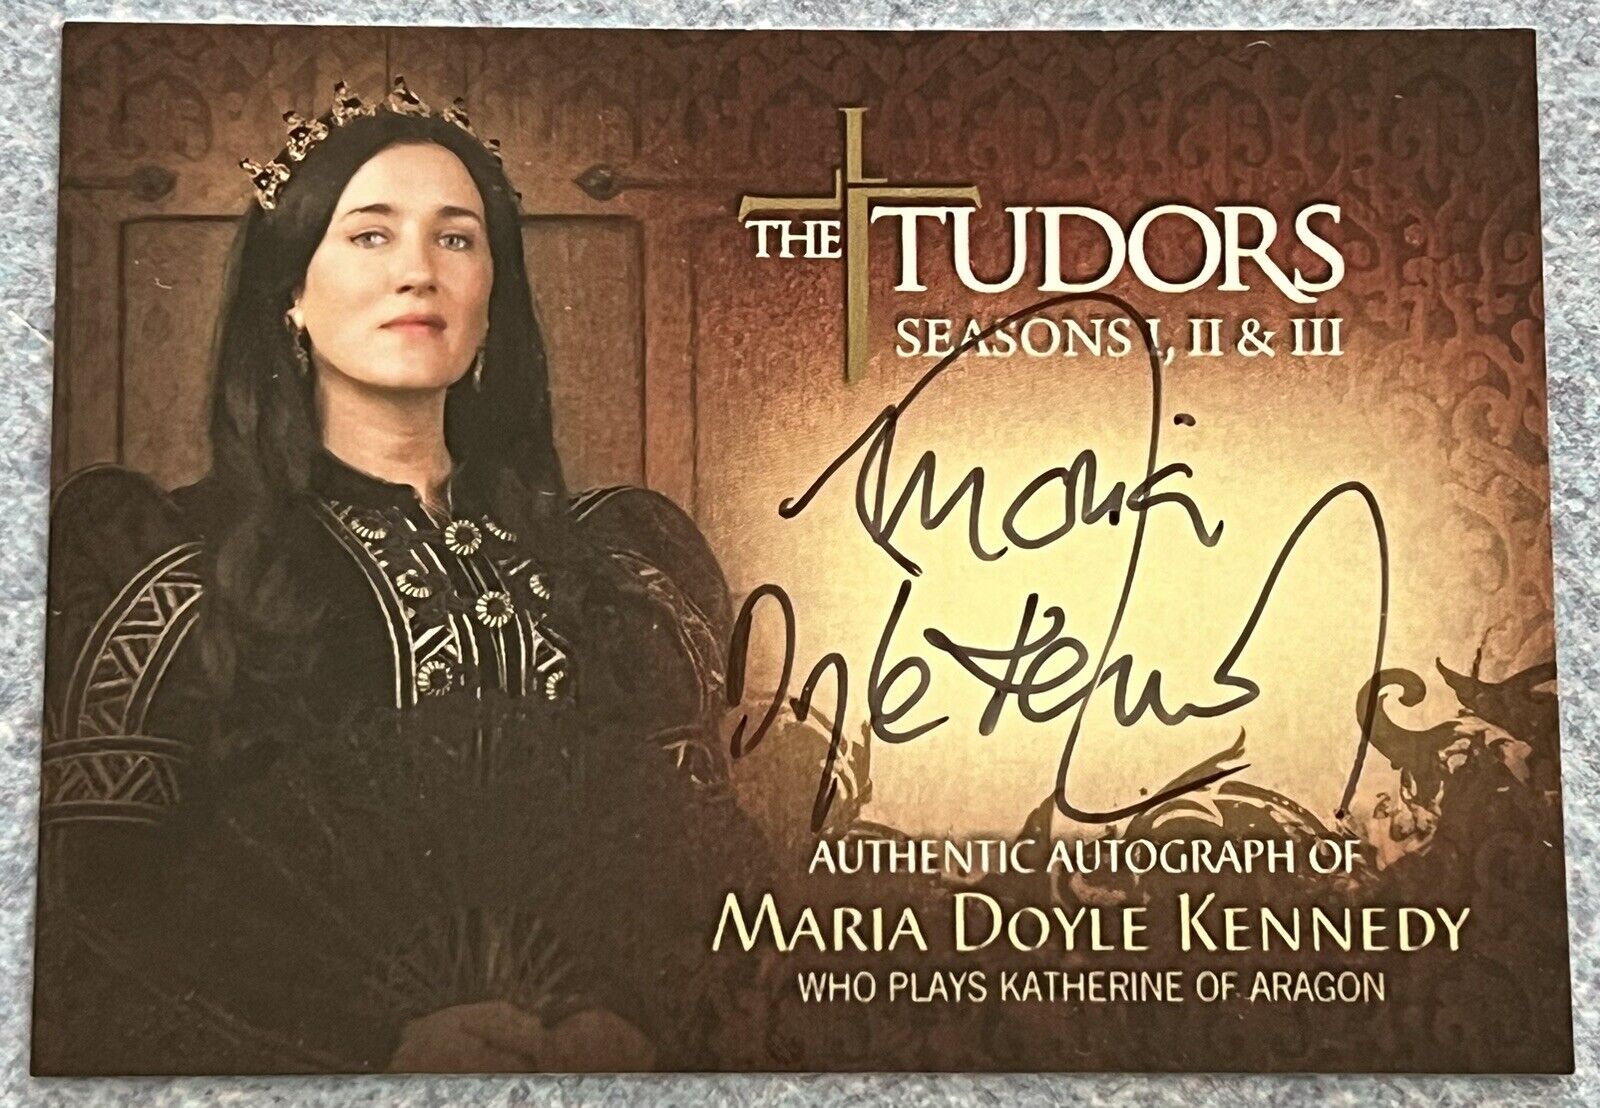 The Tudors Autograph Featuring Maria Doyle Kennedy As Queen Katherine Of Aragon